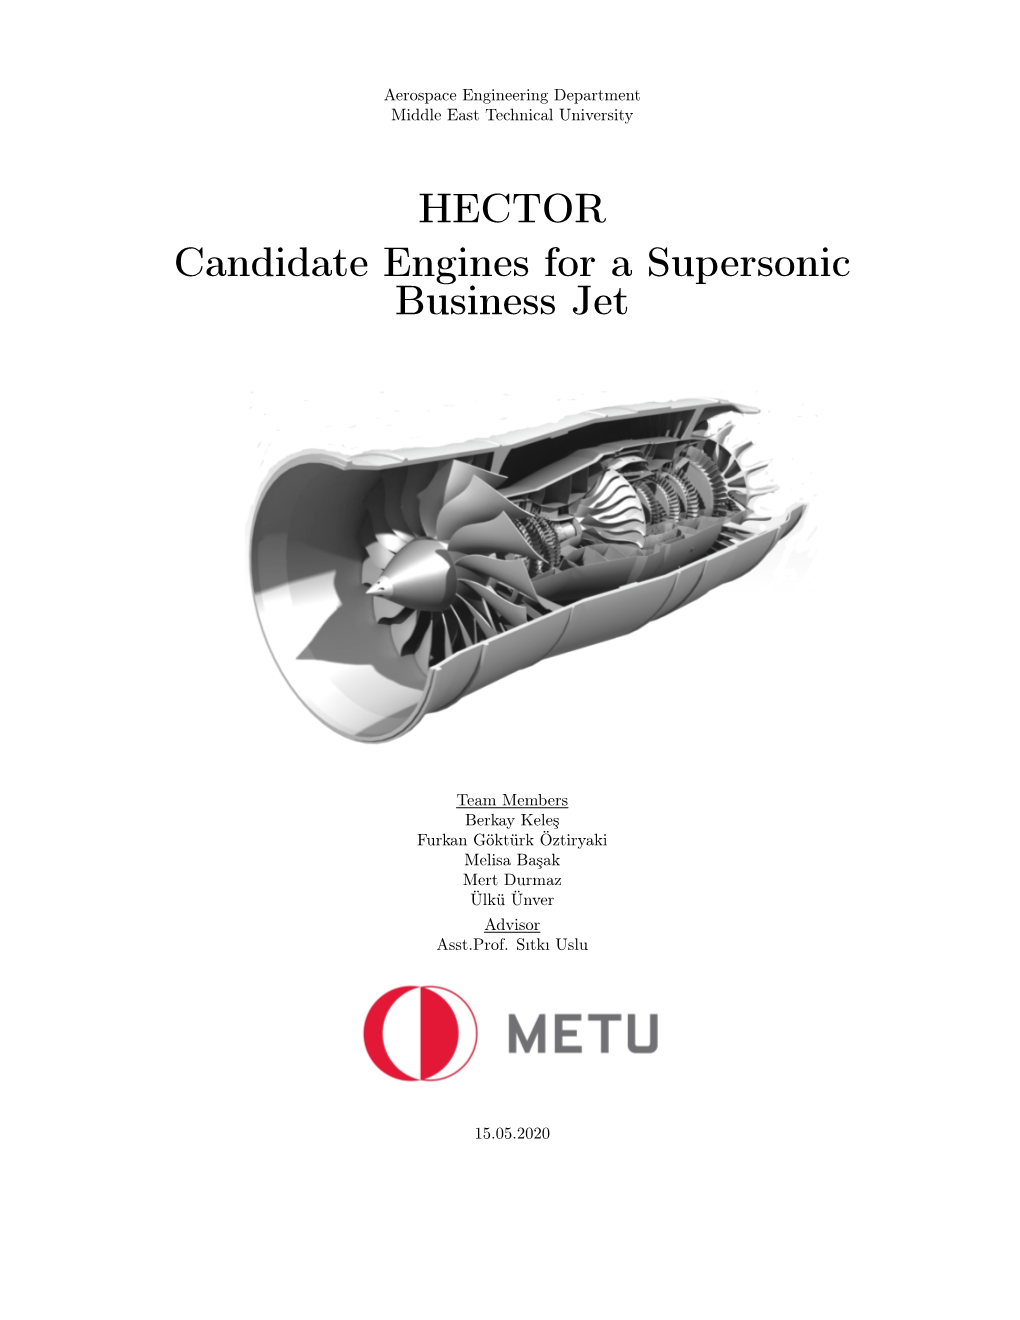 HECTOR Candidate Engines for a Supersonic Business Jet